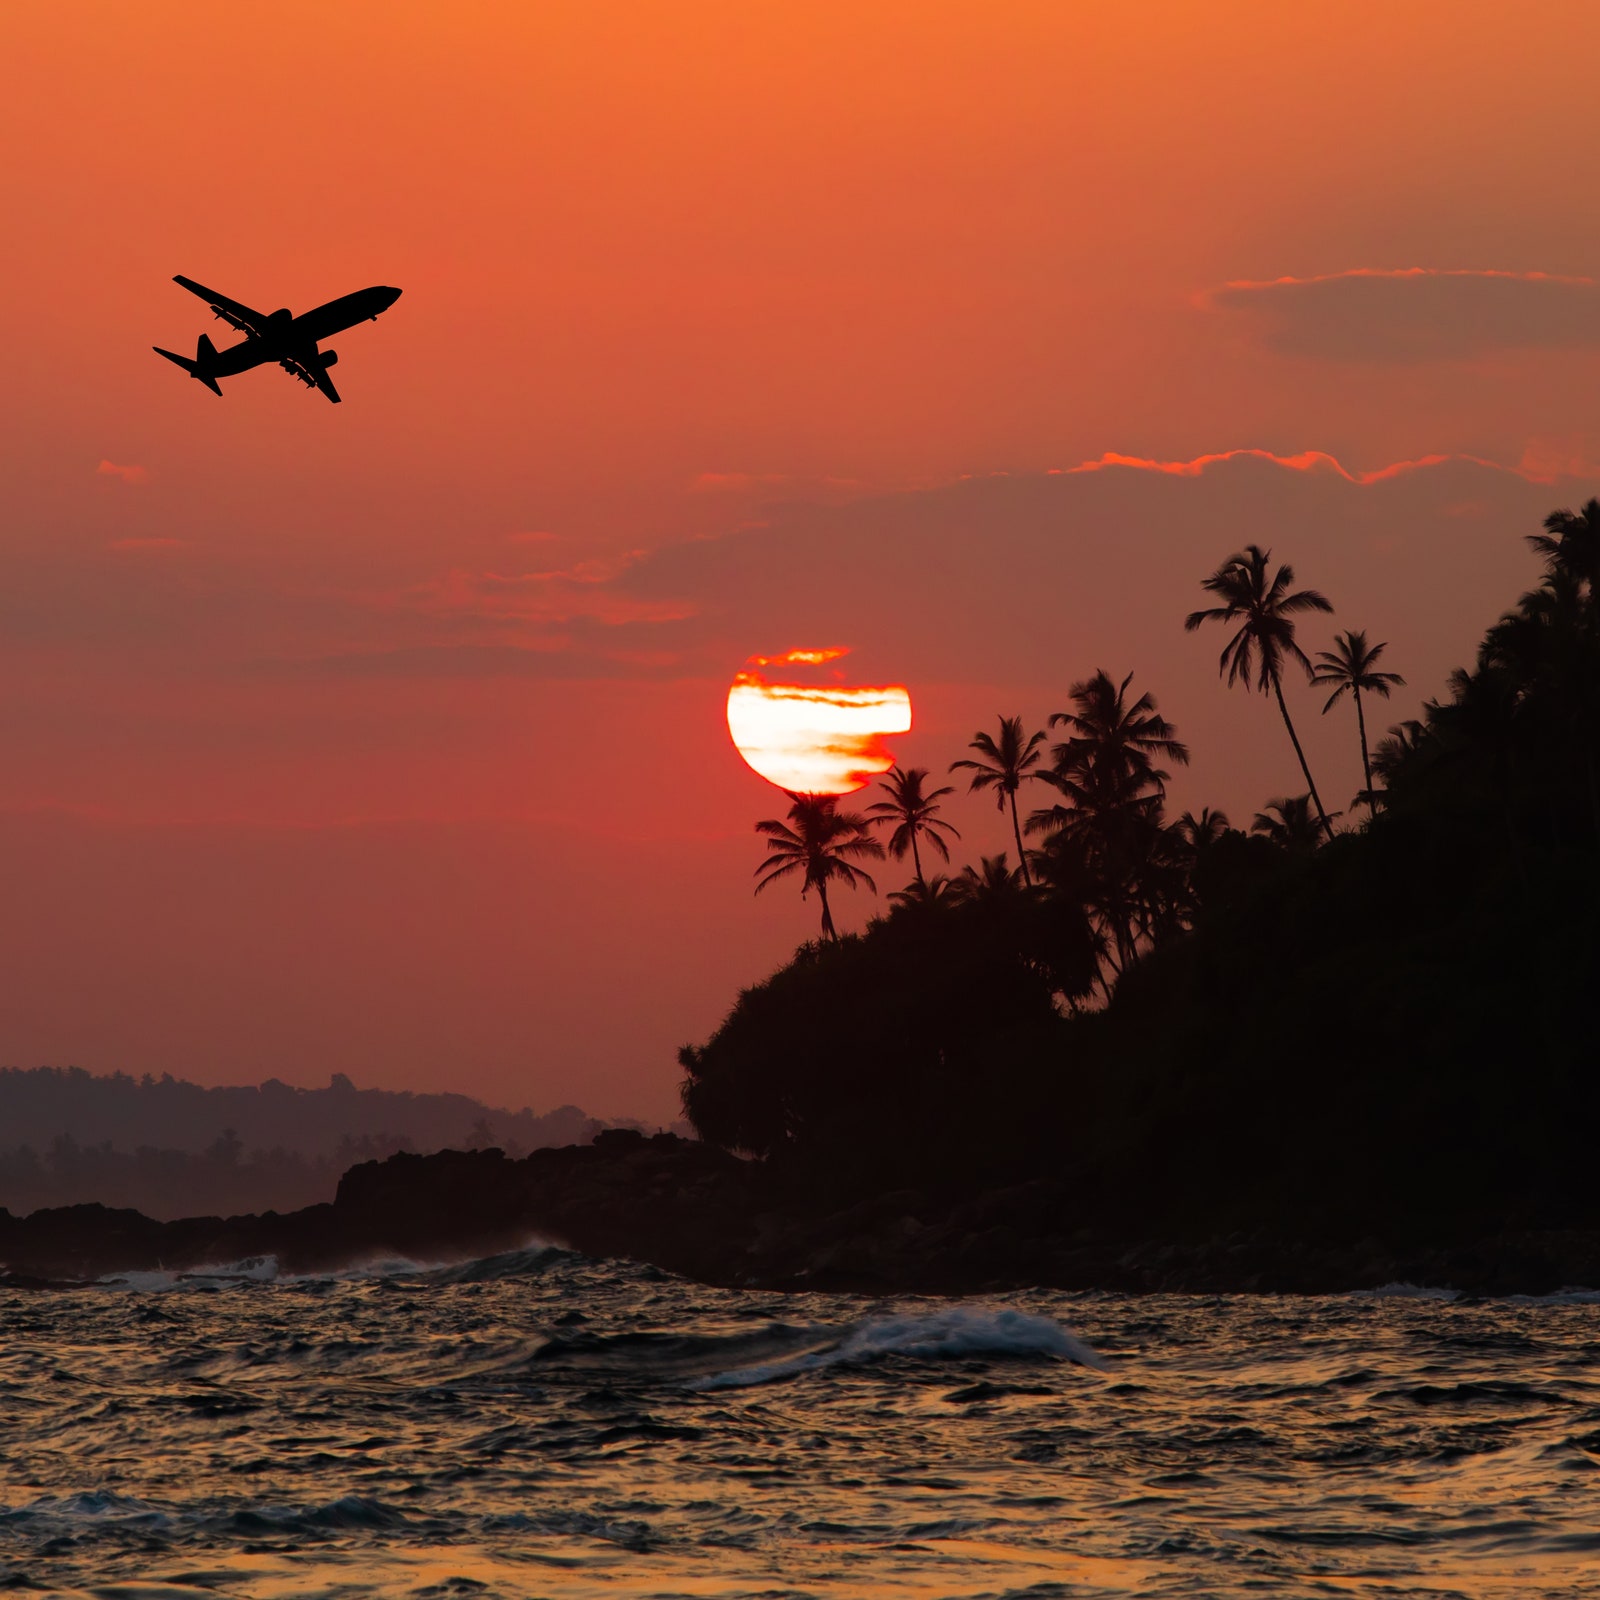 Tropical beach at sunset and a flying plane. Travel to a seaside resort